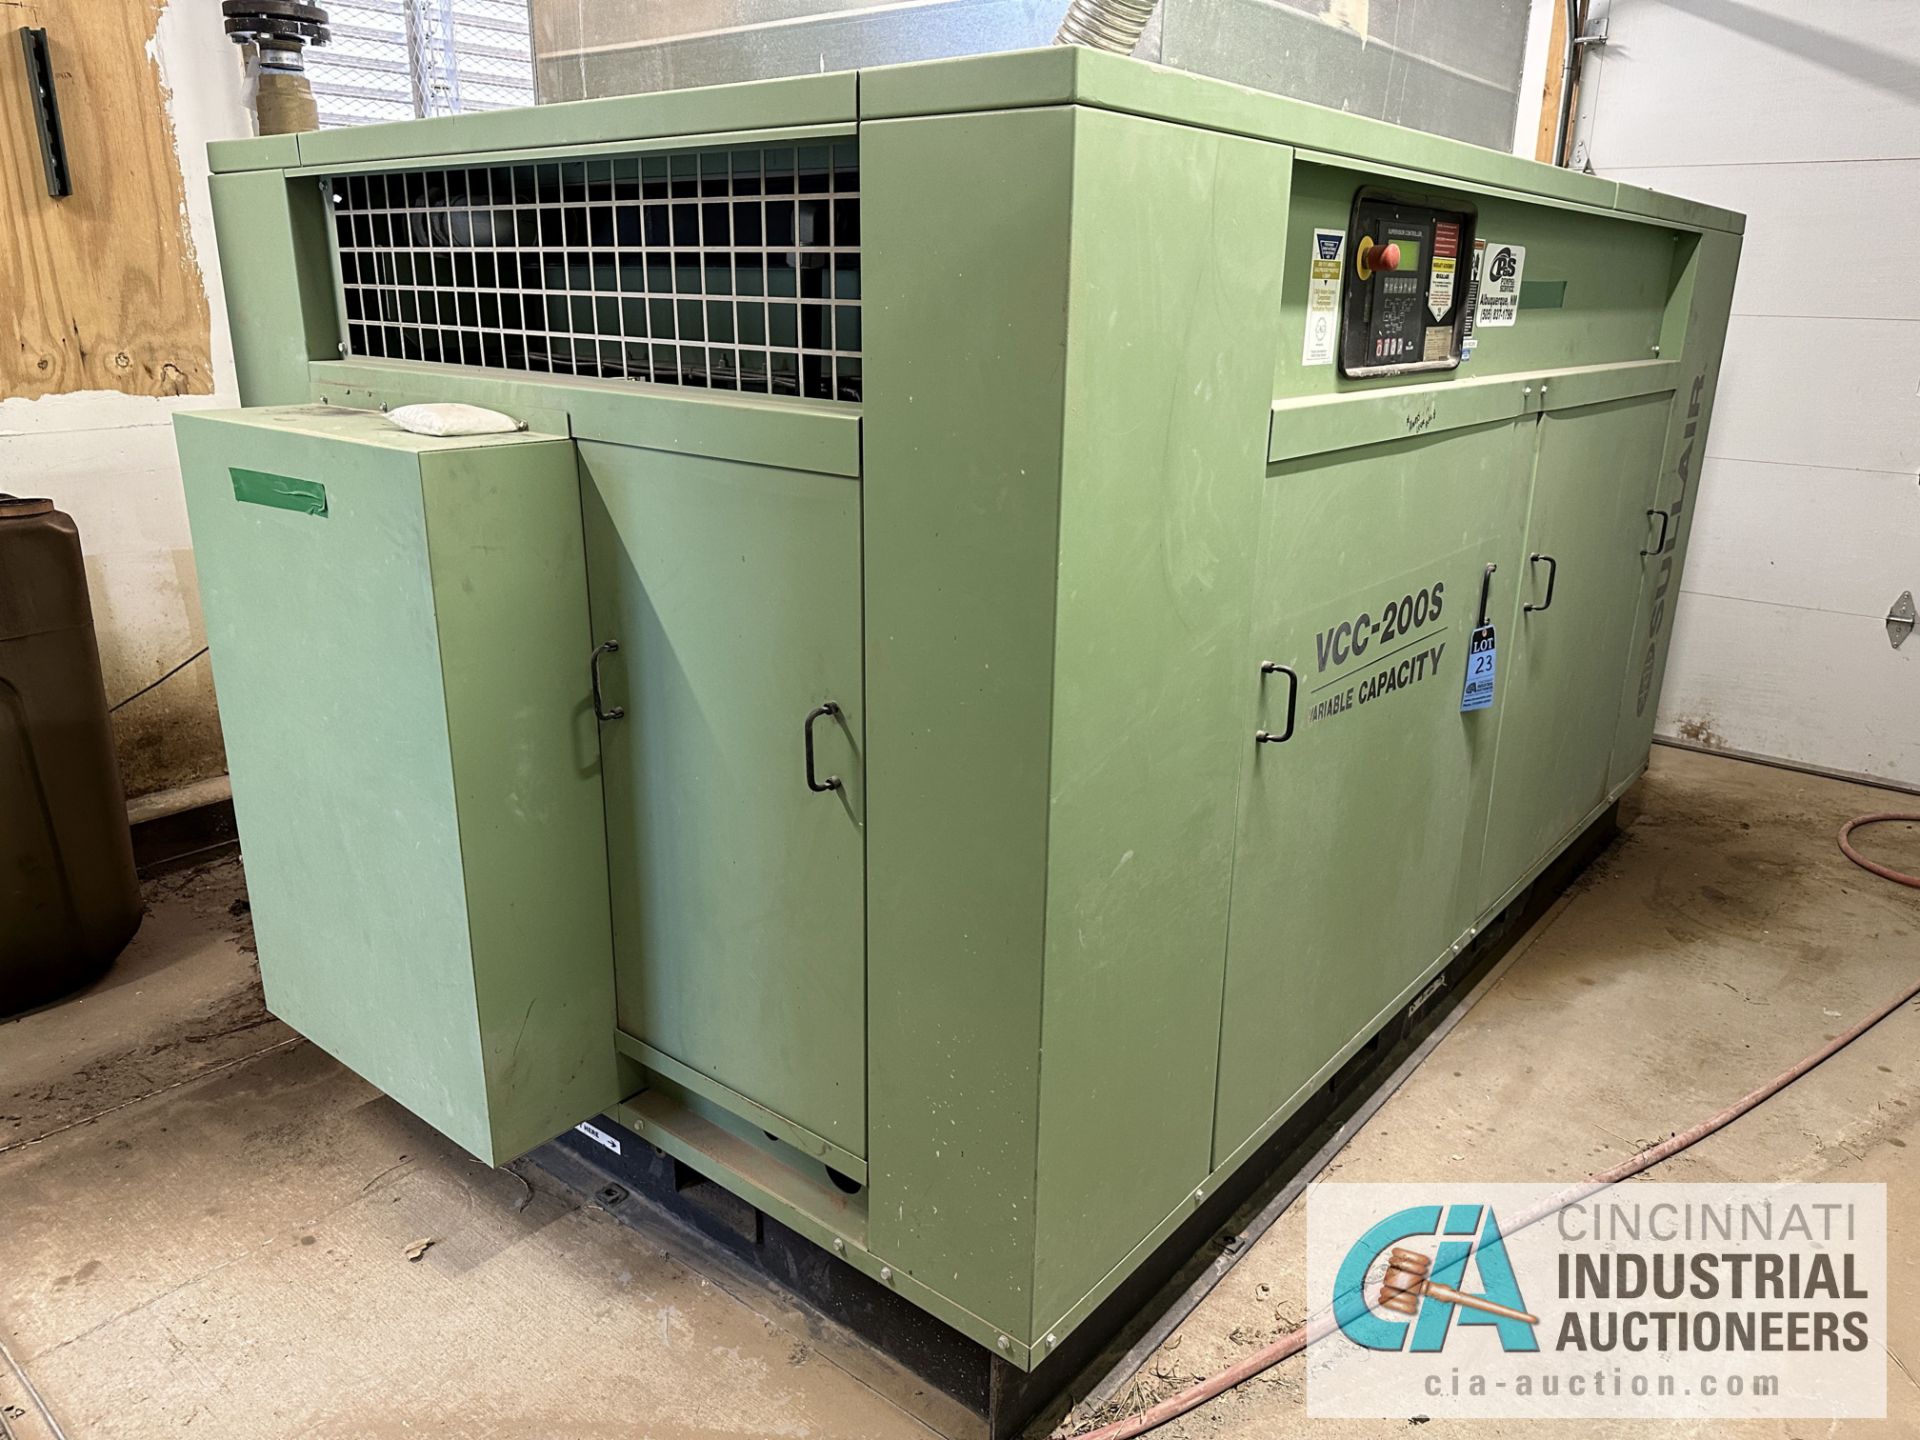 200 H.P. SULLAIR MODEL VCC2005 ROTARY SCREW AIR COMPRESSOR S/N 201805290039 3 PHASE, 460 VOLTS, 1780